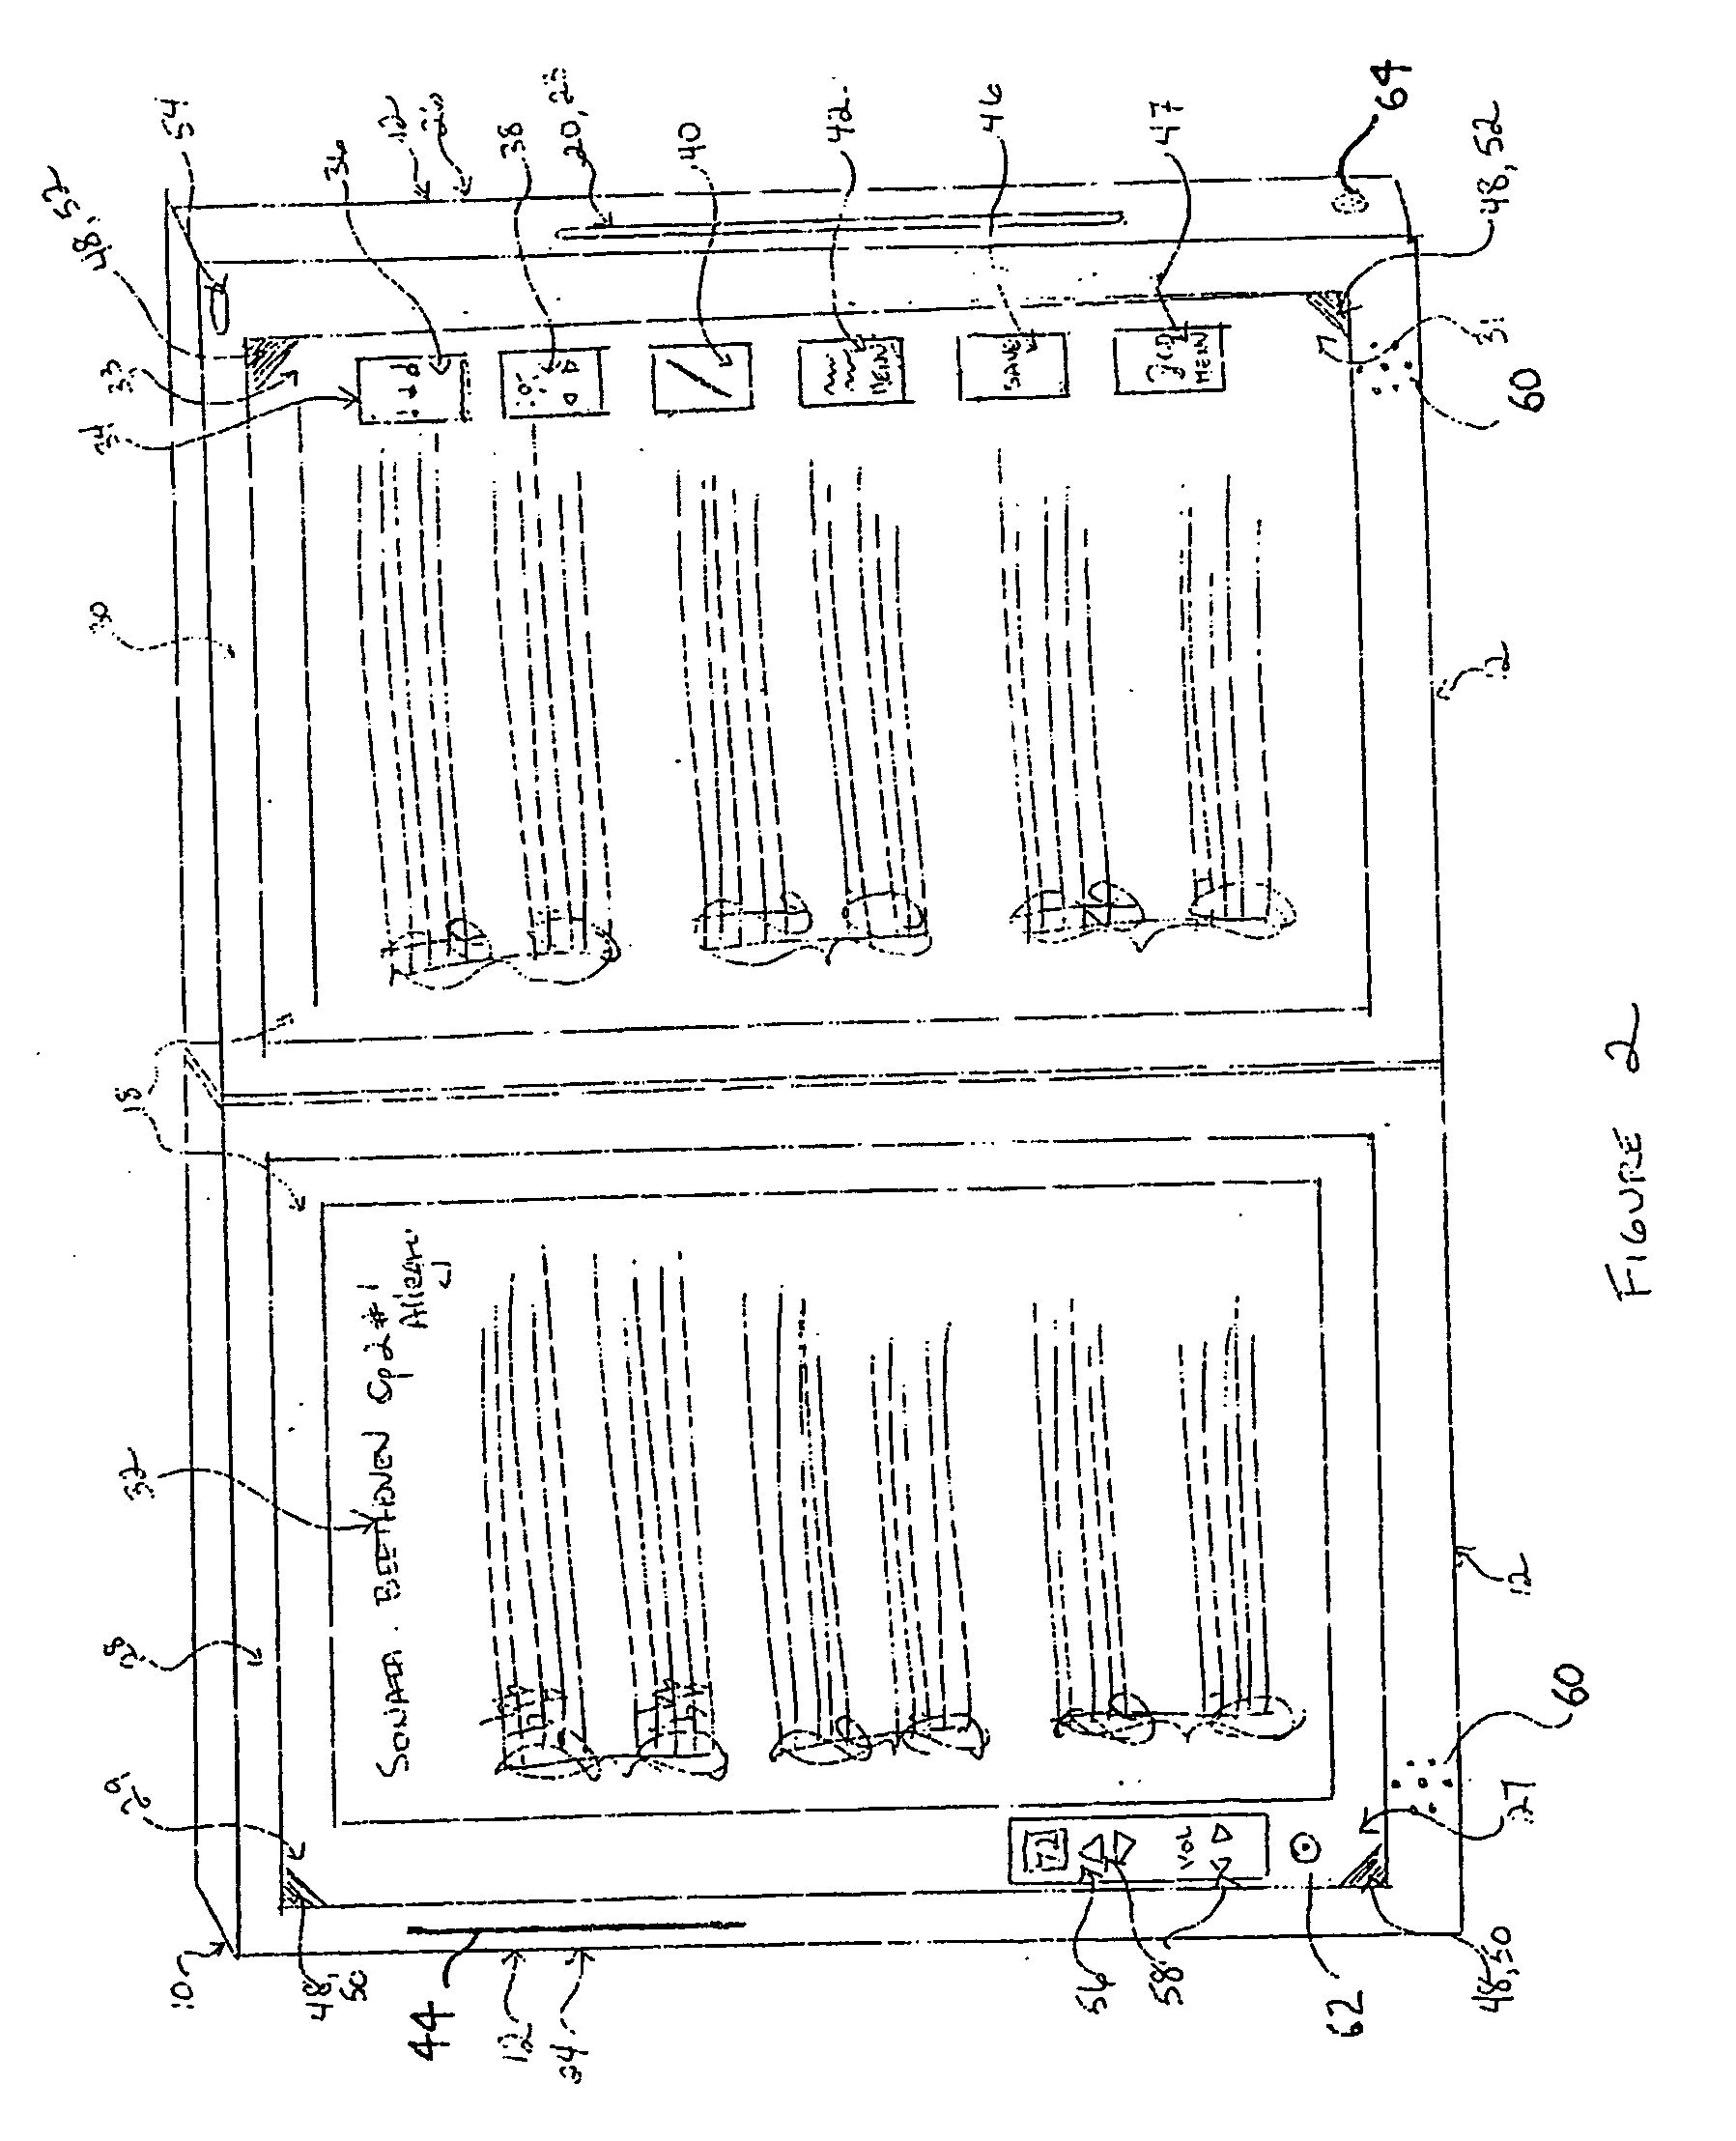 Portable electronic music score device for transporting, storing displaying, and annotating music scores